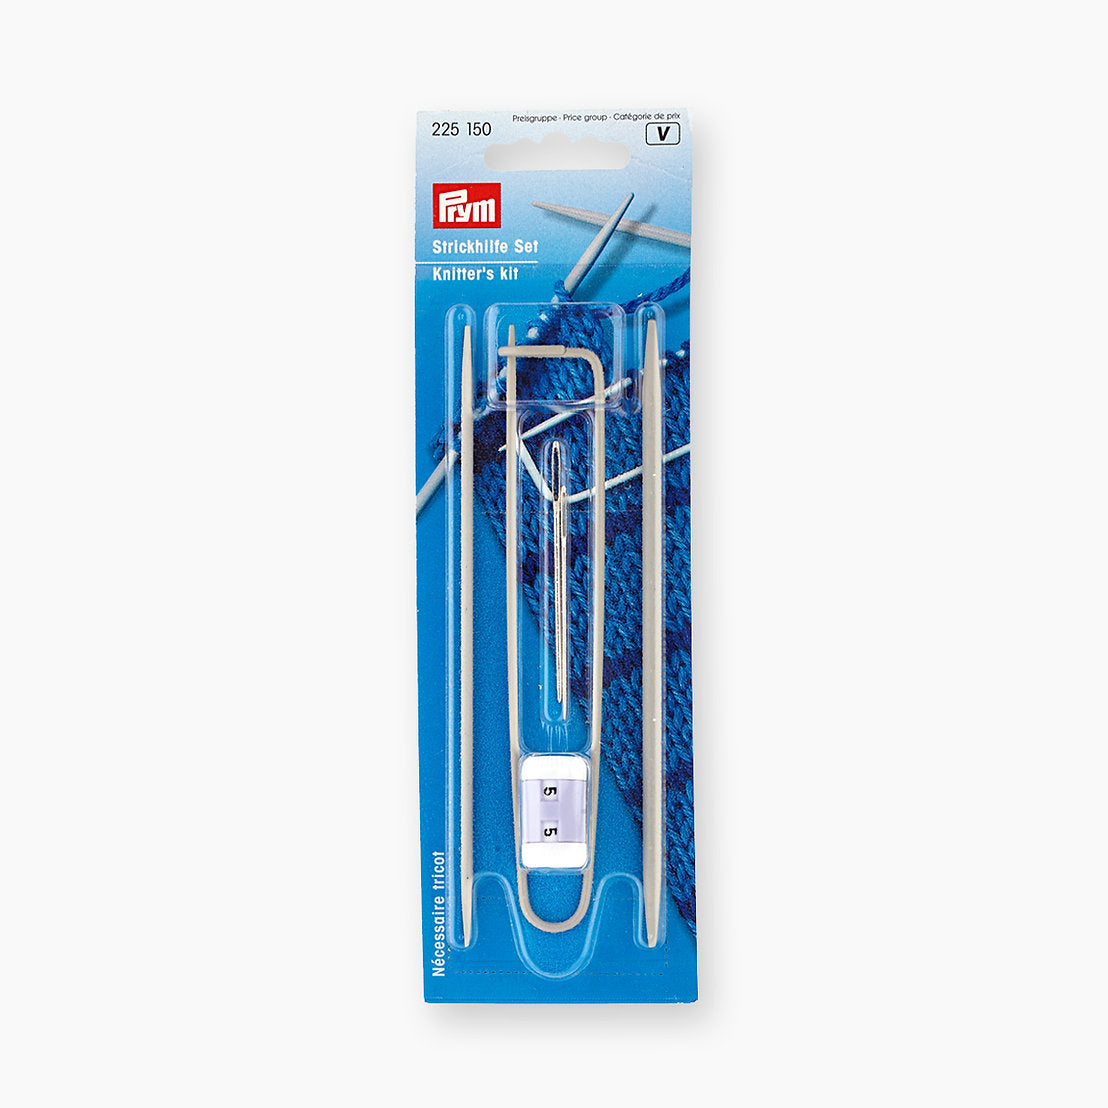 Prym Knitting Accessory Kit 225150 - Essential tools for your knitting projects